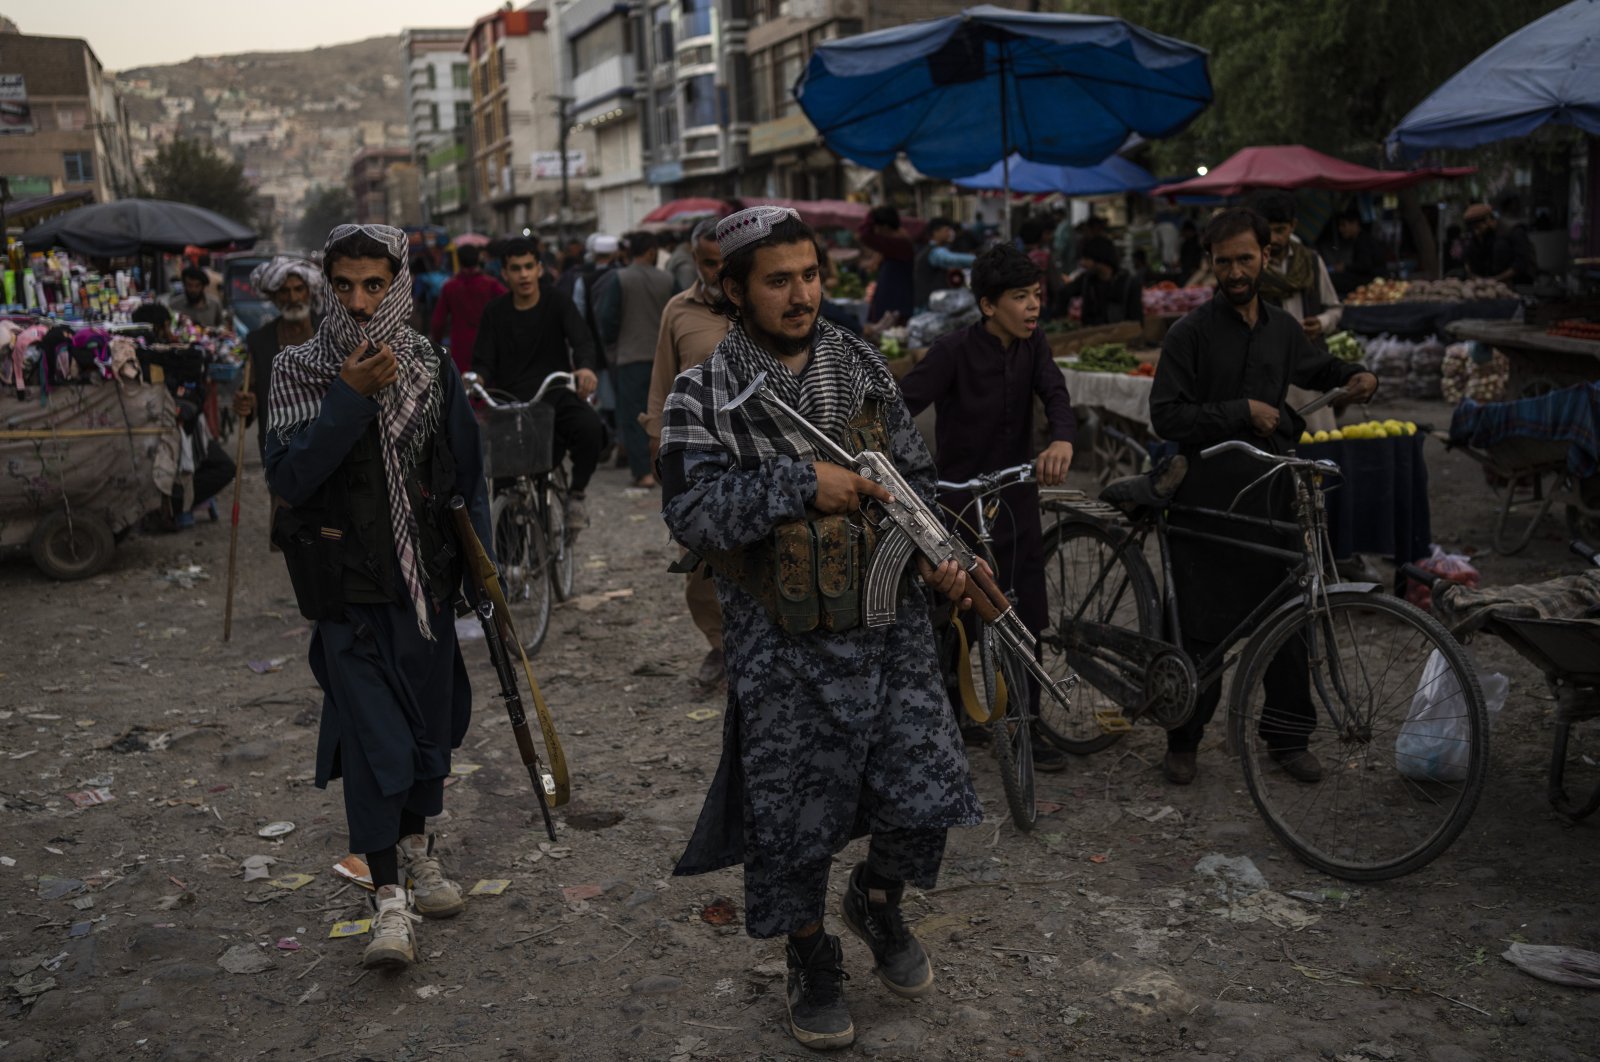 Taliban fighters patrol a market in Kabul&#039;s Old City, Afghanistan, Sept. 14, 2021. (AP Photo)